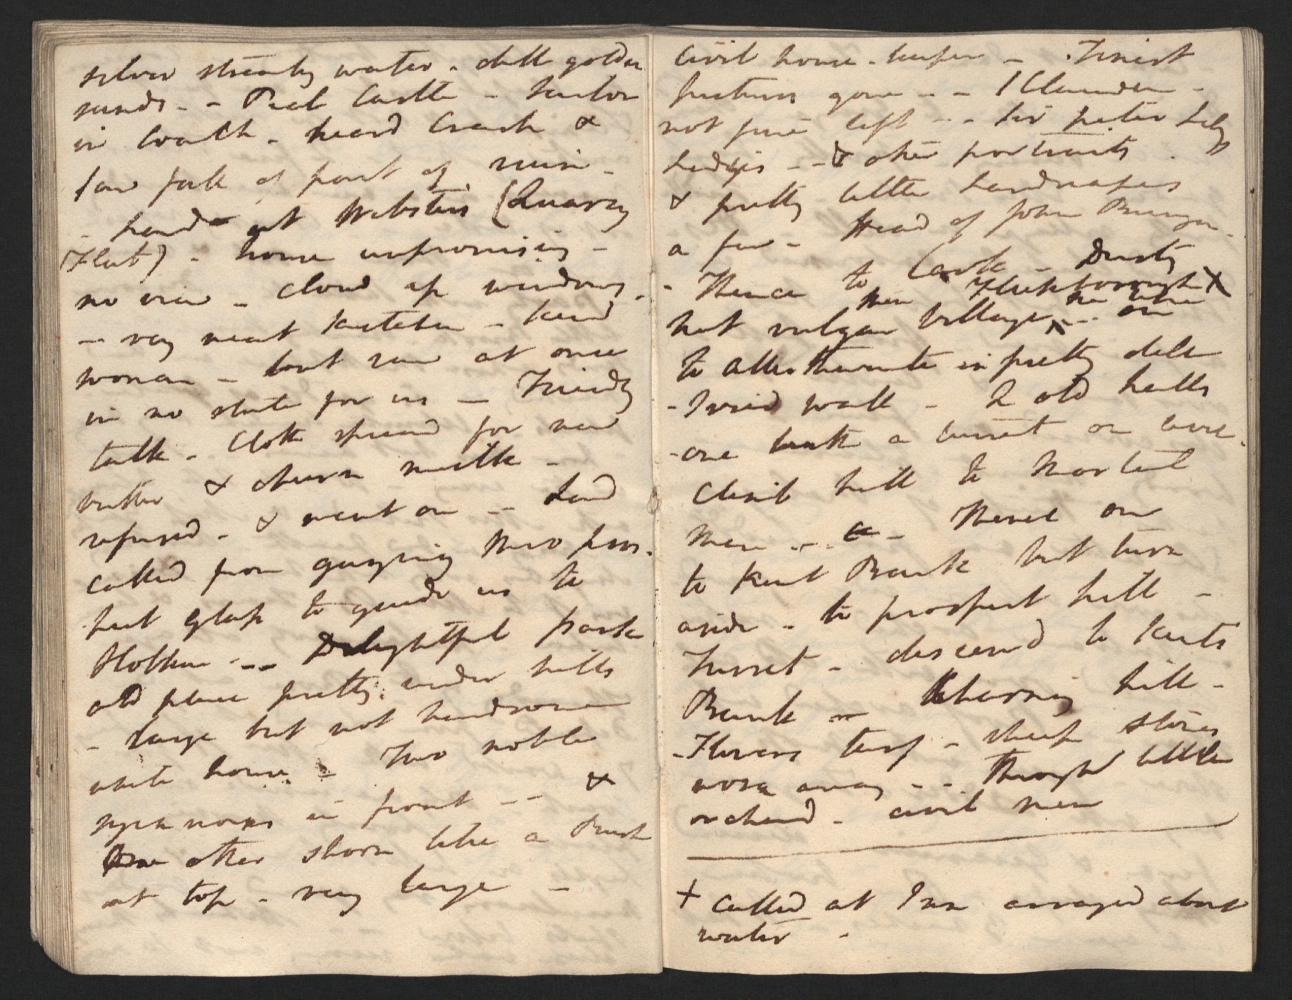 Portion of the 7 July 1825 entry in DCMS 104.1.